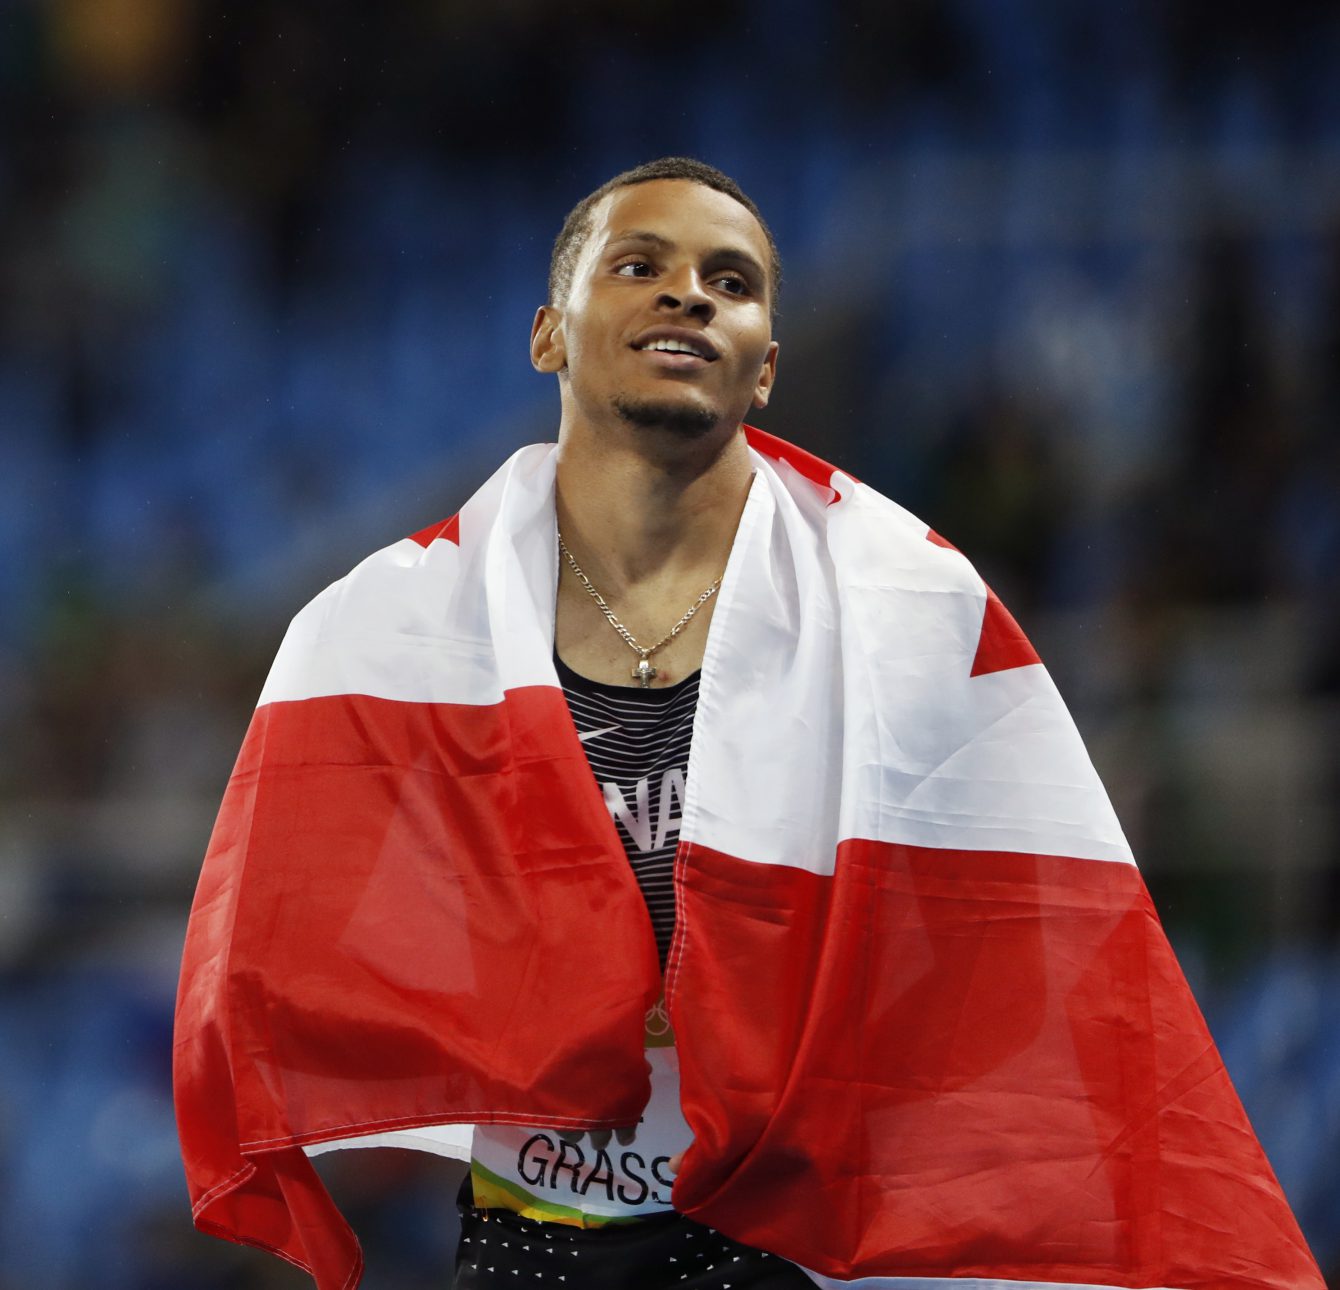 Canada's Andre De Grasse celebrates silver in the men's 200m final at the 2016 Olympic Summer Games in Rio de Janeiro, Brazil on Thursday, Aug. 18, 2016. (photo/ Stephen Hosier)